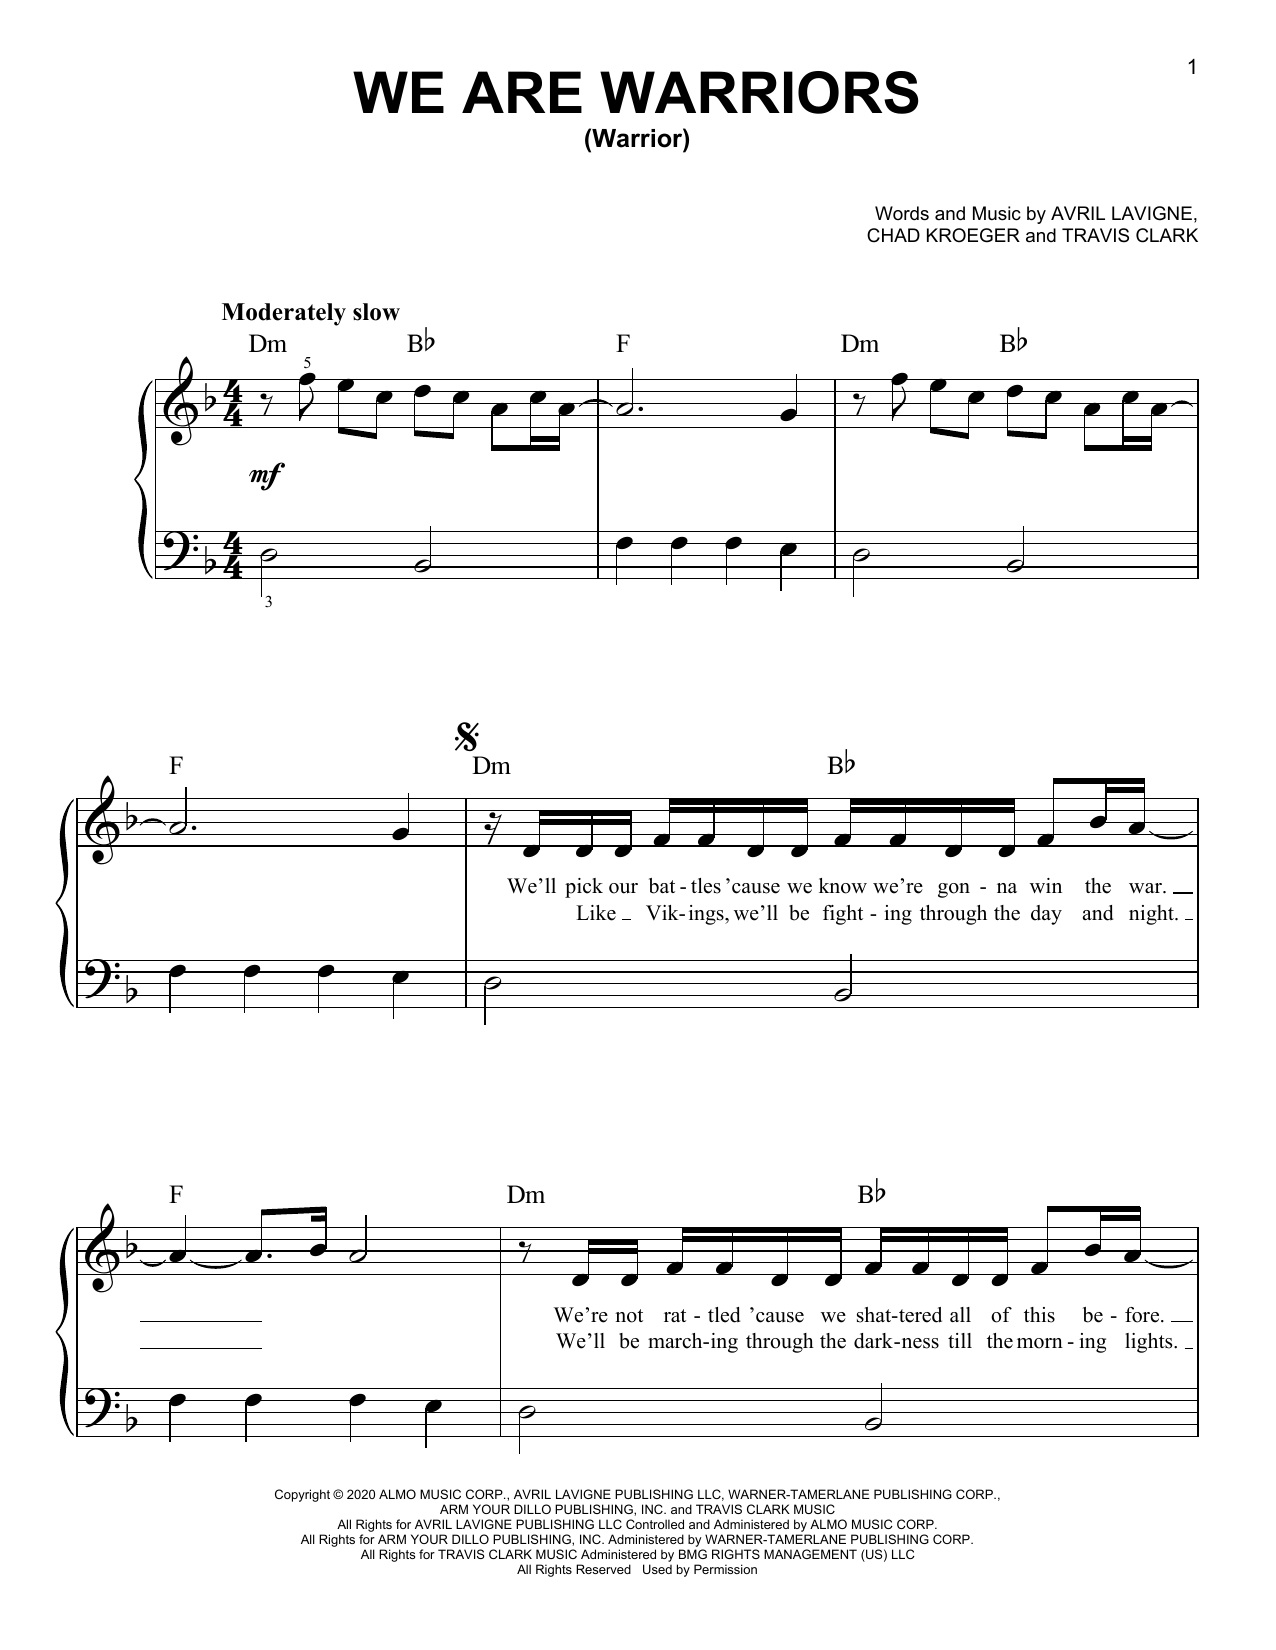 Download Avril Lavigne We Are Warriors (Warrior) Sheet Music